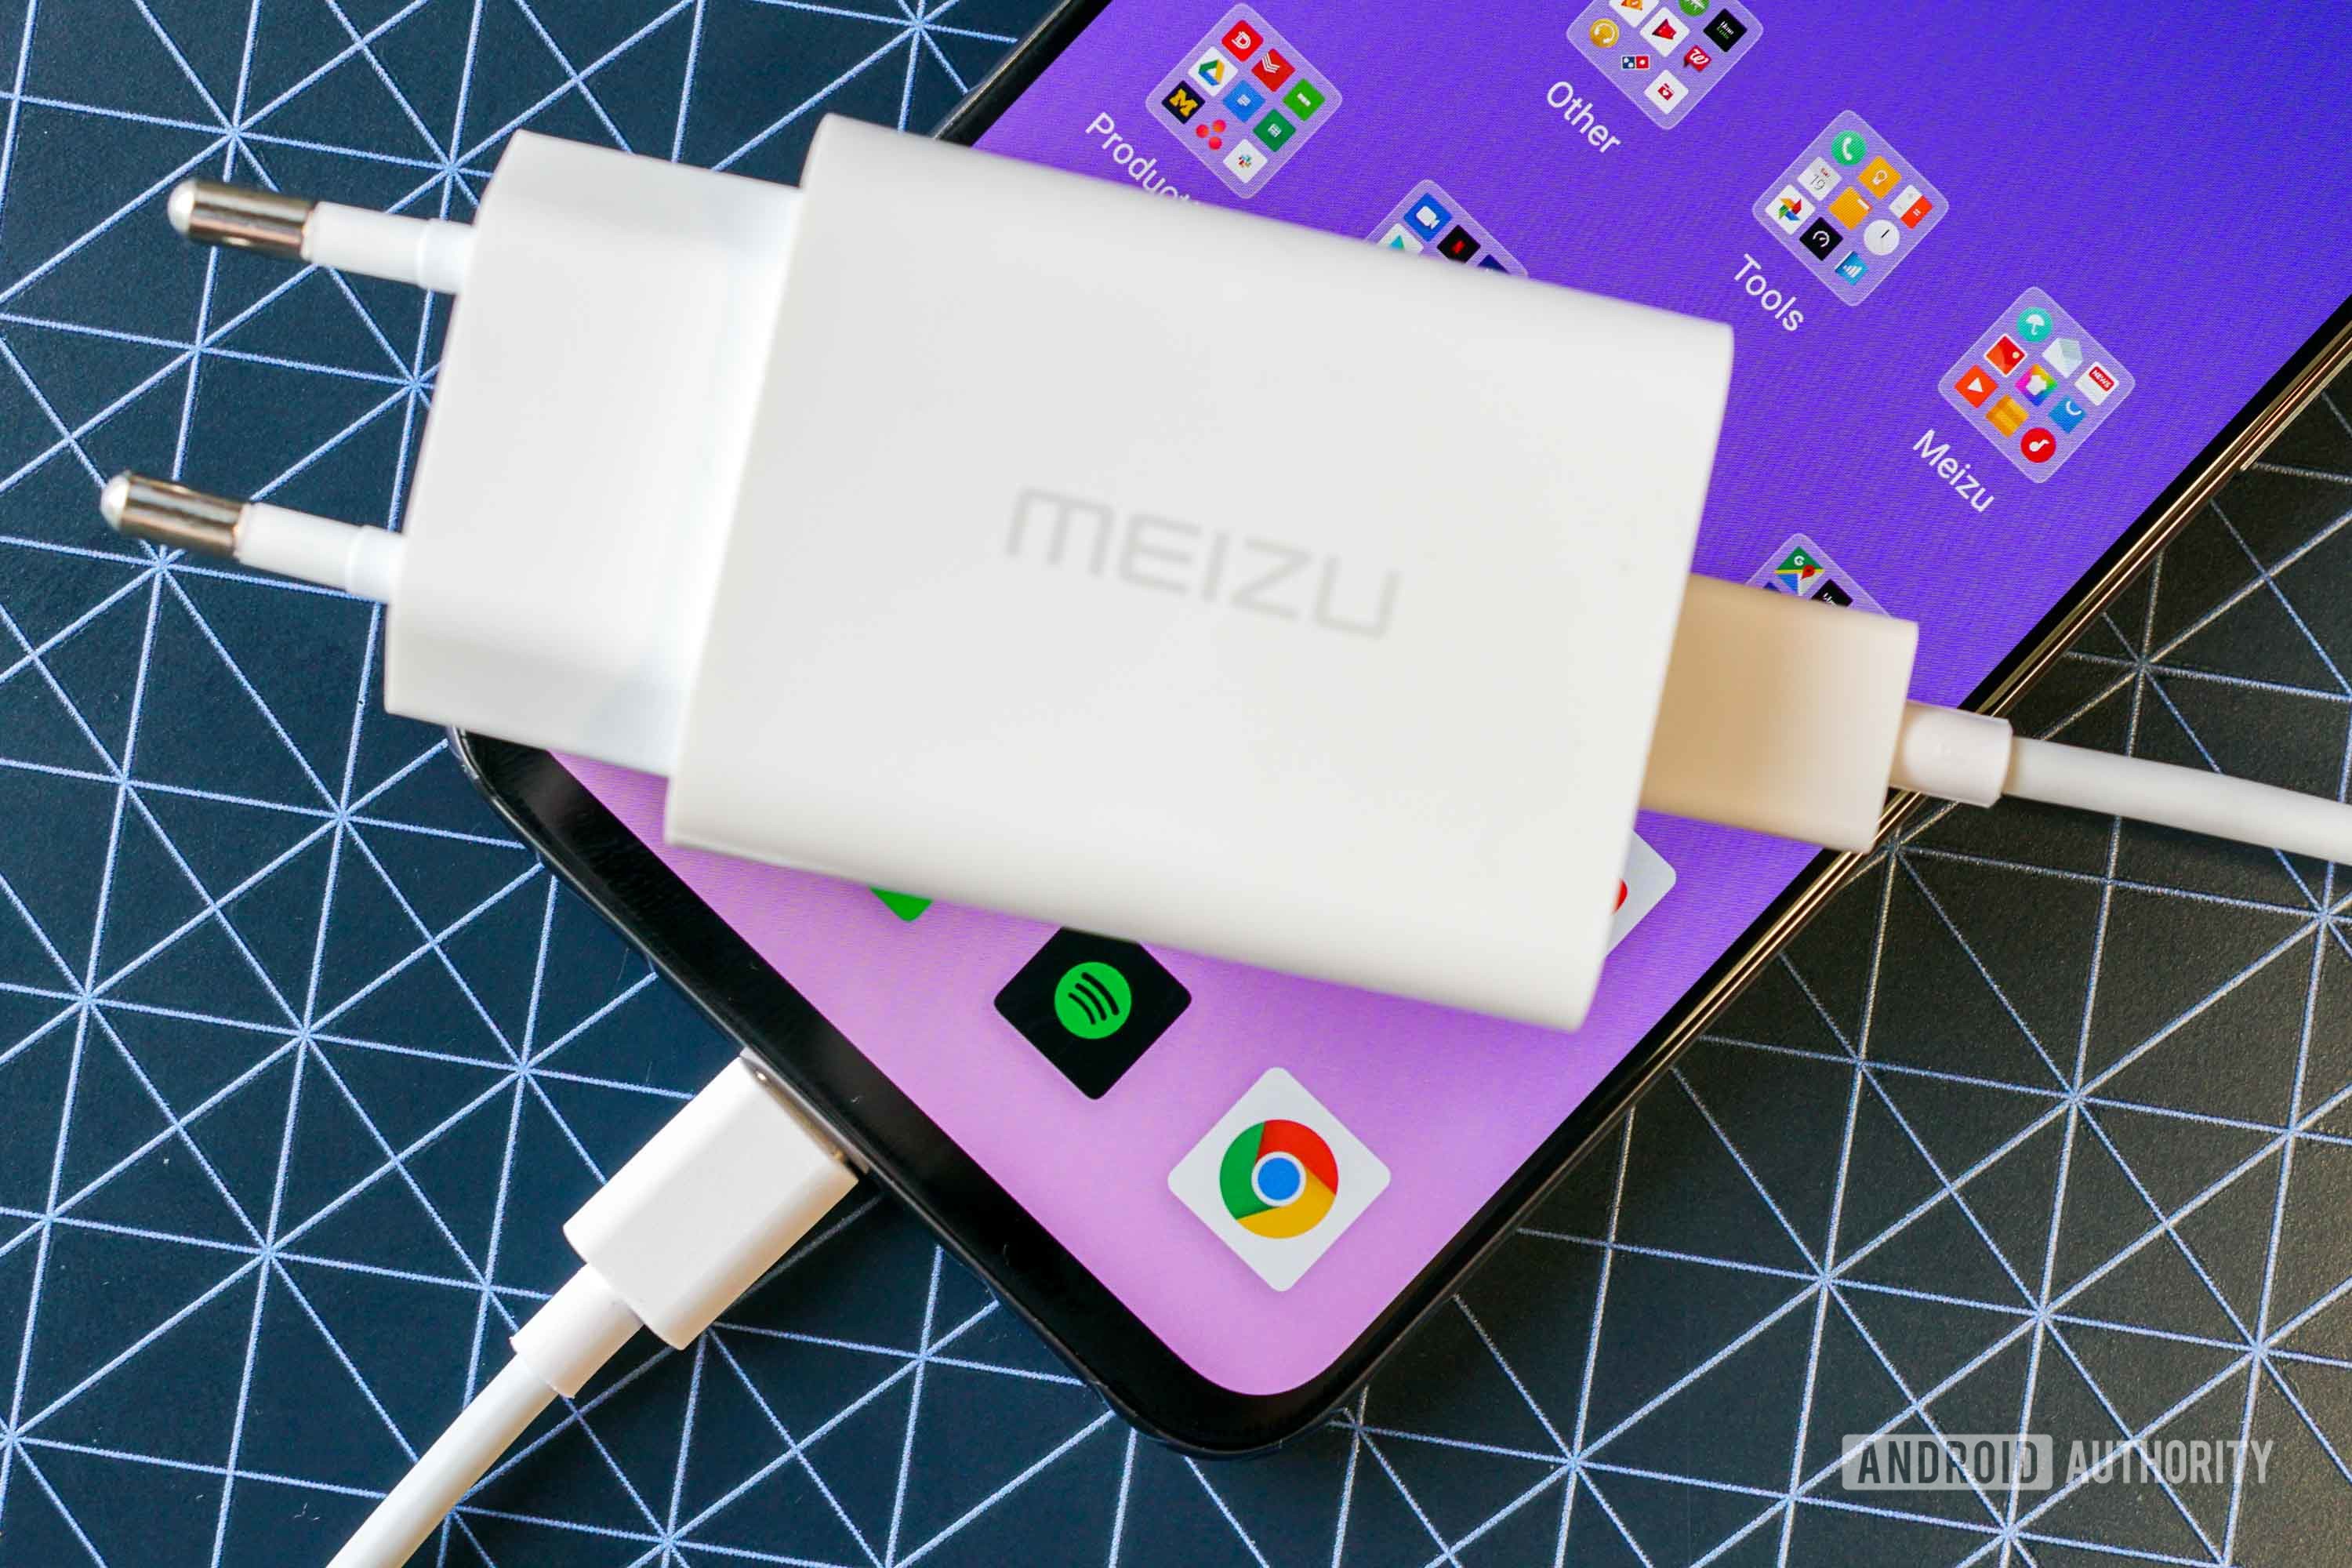 Meizu 16s and its mCharge fast charger